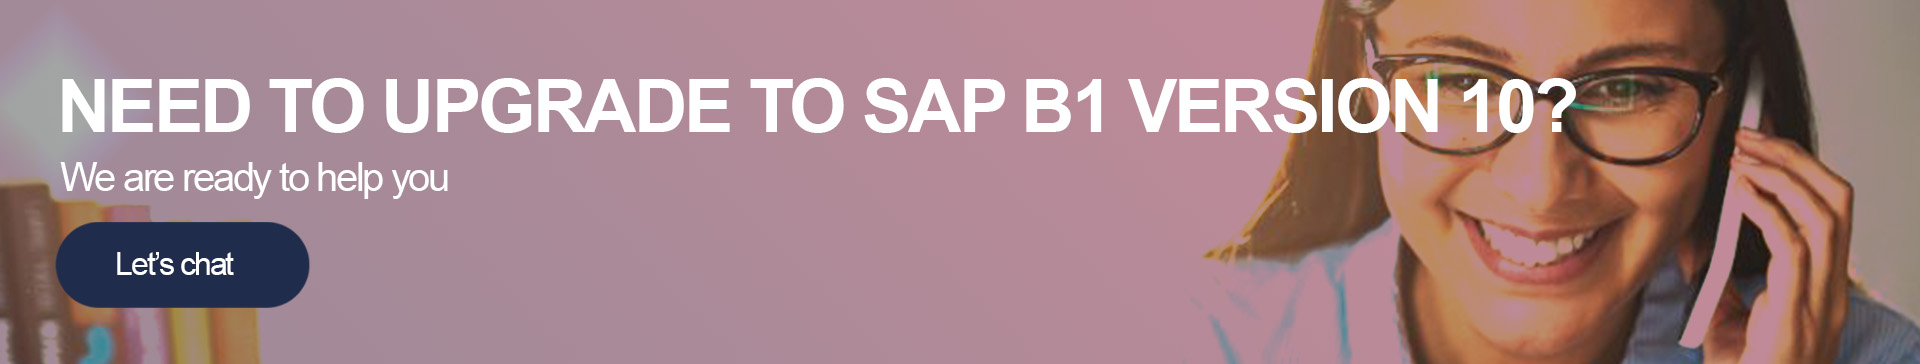 contact us banner - sap business one version 10 upgrade- consensus international